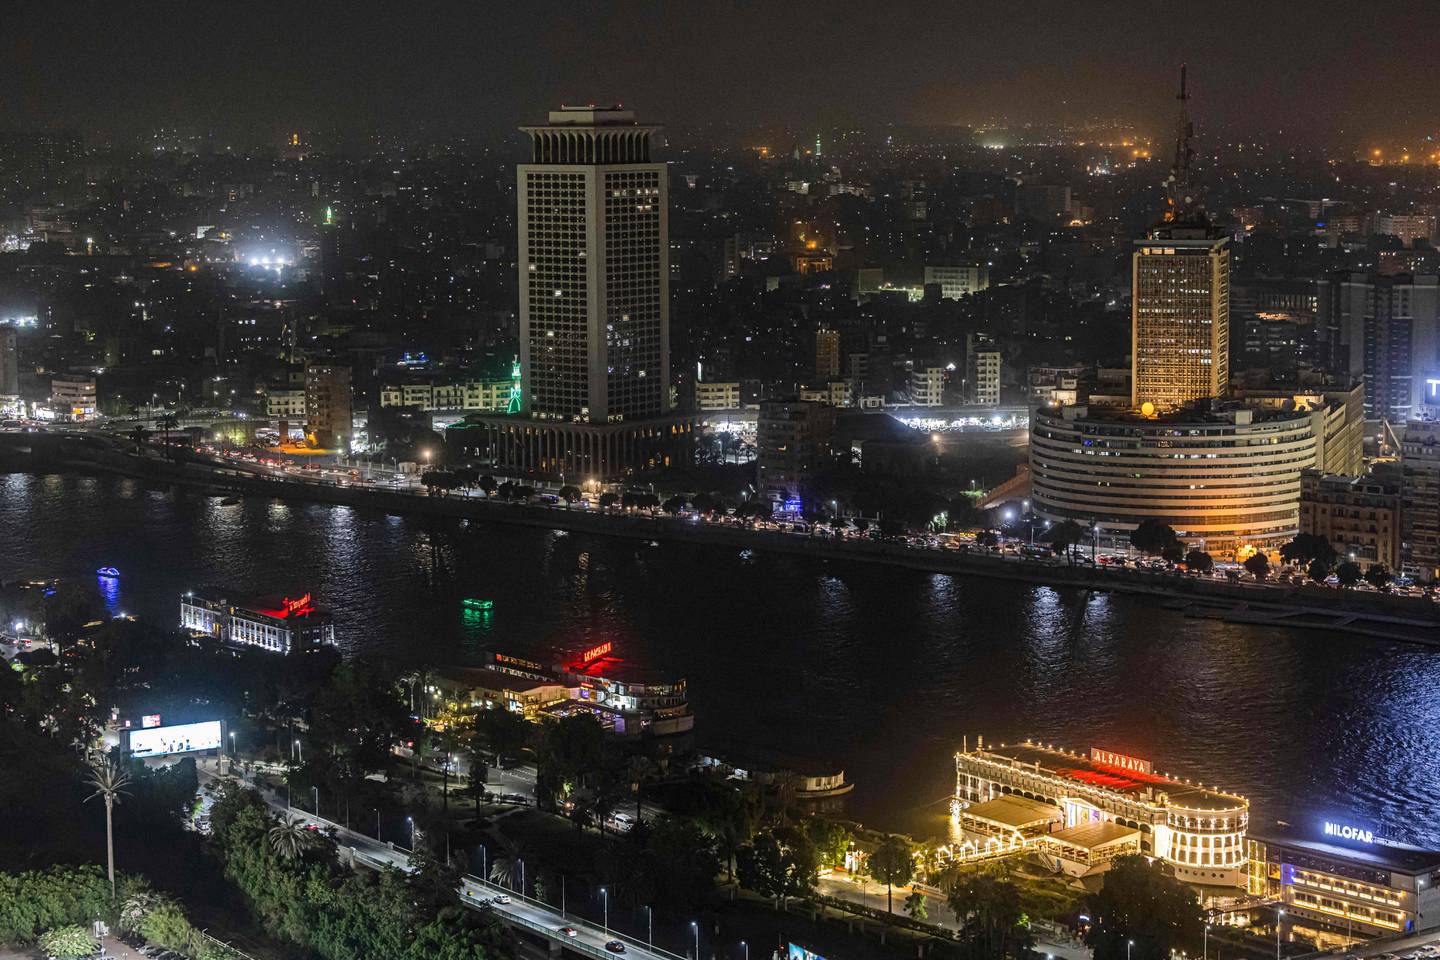 A night-time view of central Cairo, the Egyptian capital of about 20 million people where the economic crisis has hit the hardest. AFP